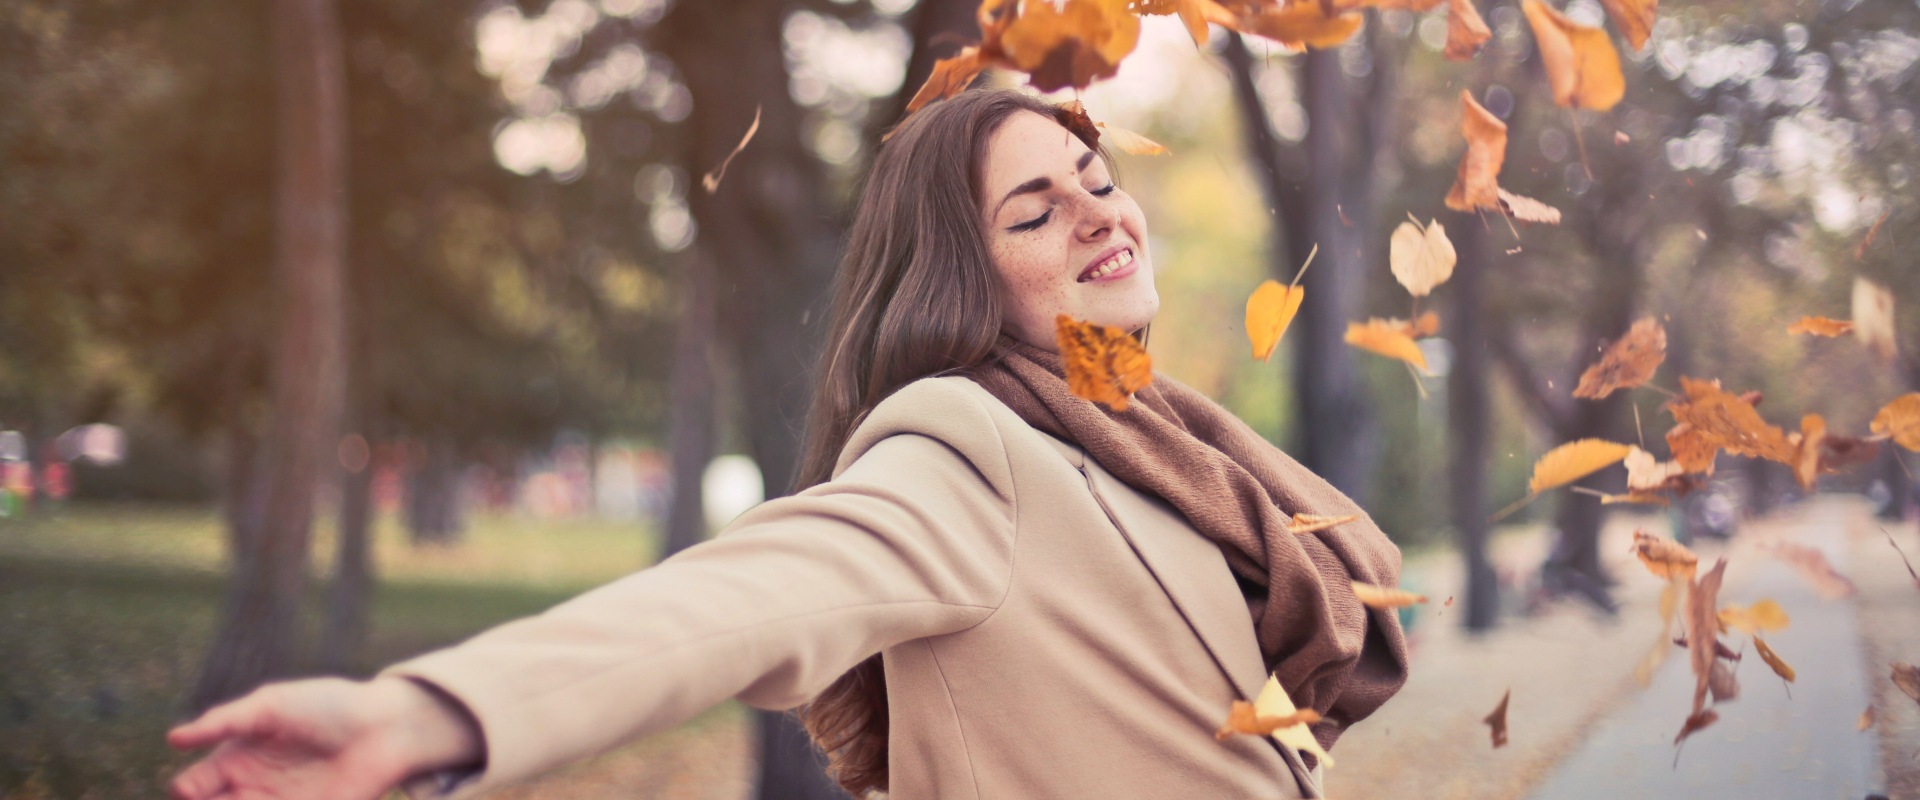 A woman looking happy and free as Autumn leaves fall around her.